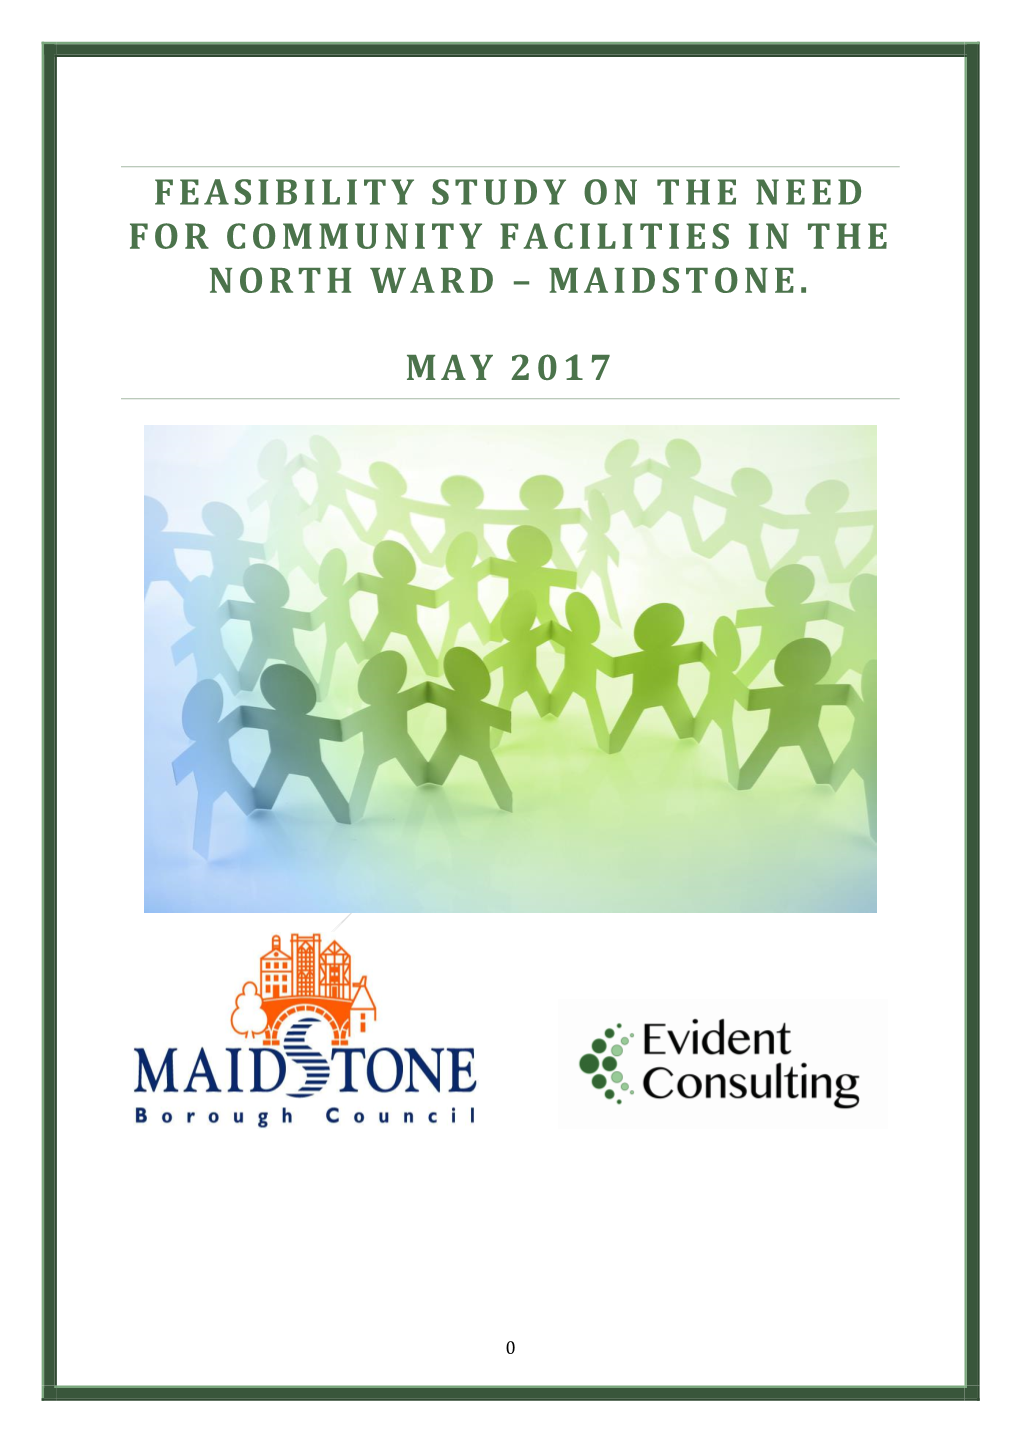 Feasibility Study on the Need for Community Facilities in the North Ward – Maidstone